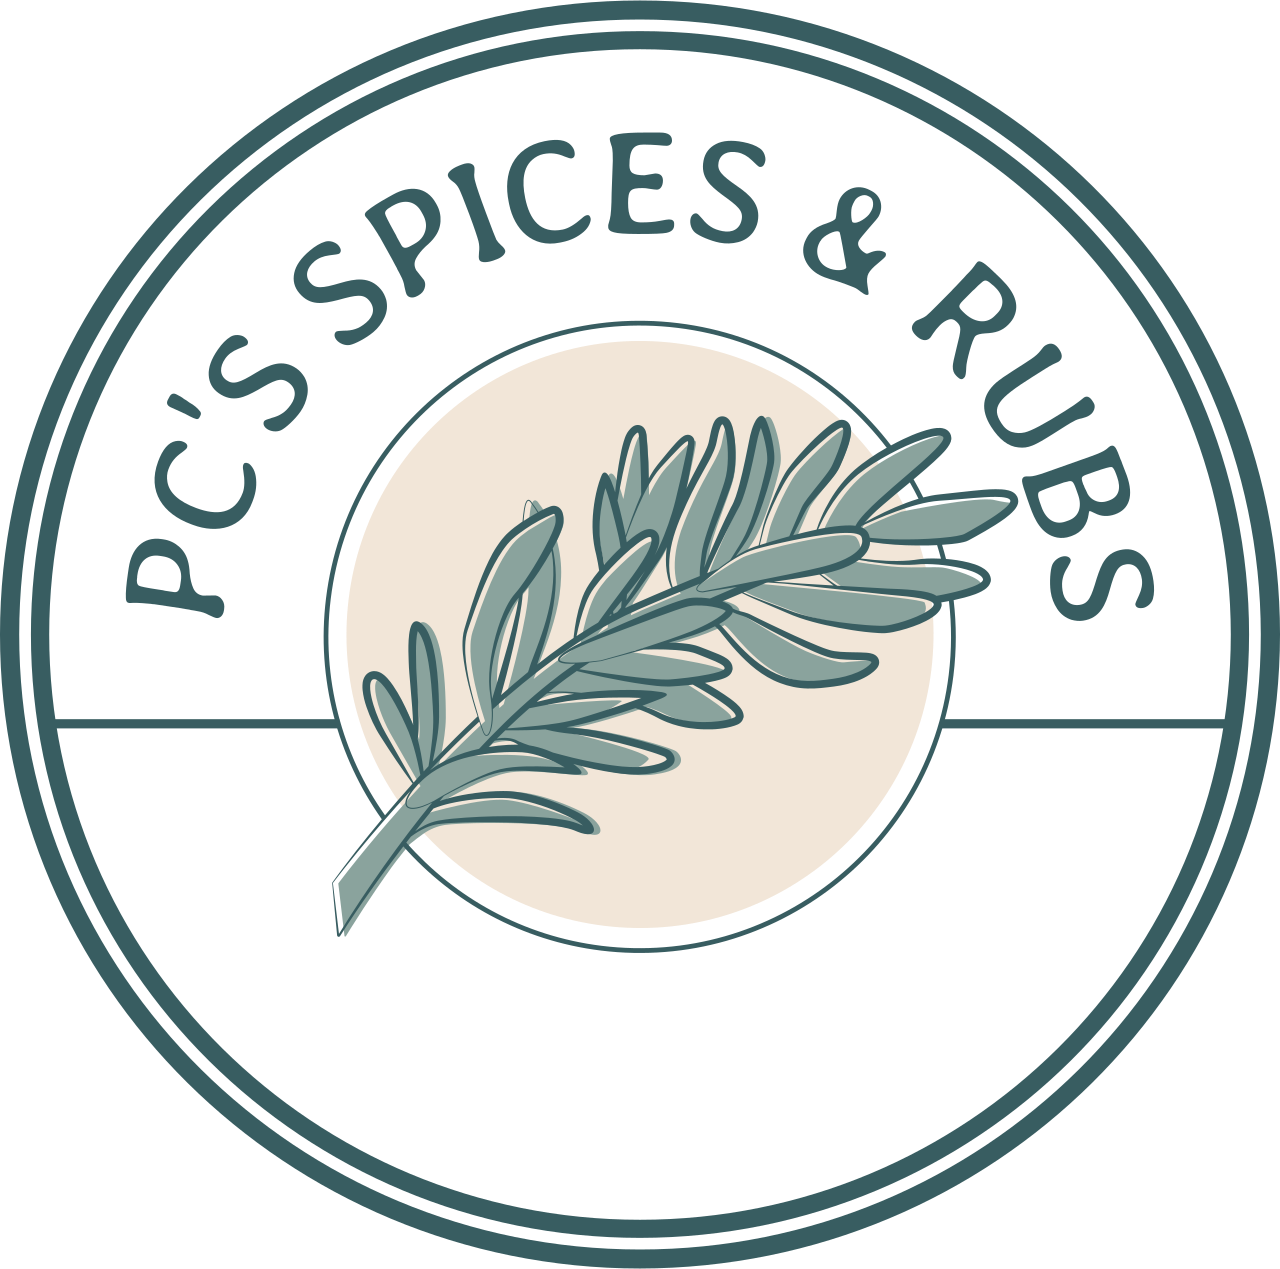 PC'S SPICES & RUBS's web page